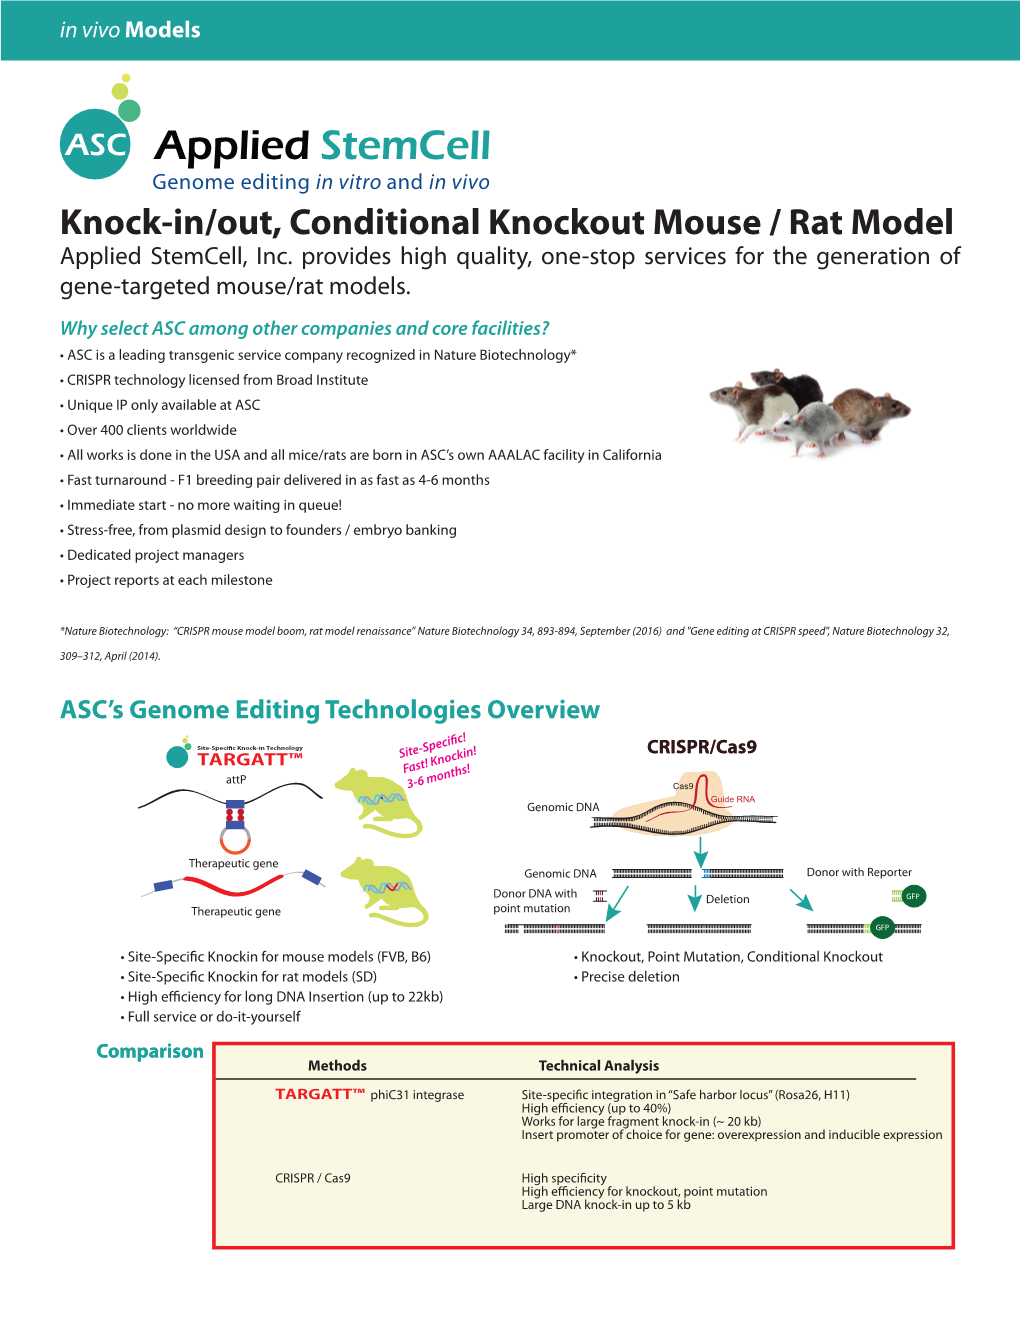 Knock-In/Out, Conditional Knockout Mouse / Rat Model